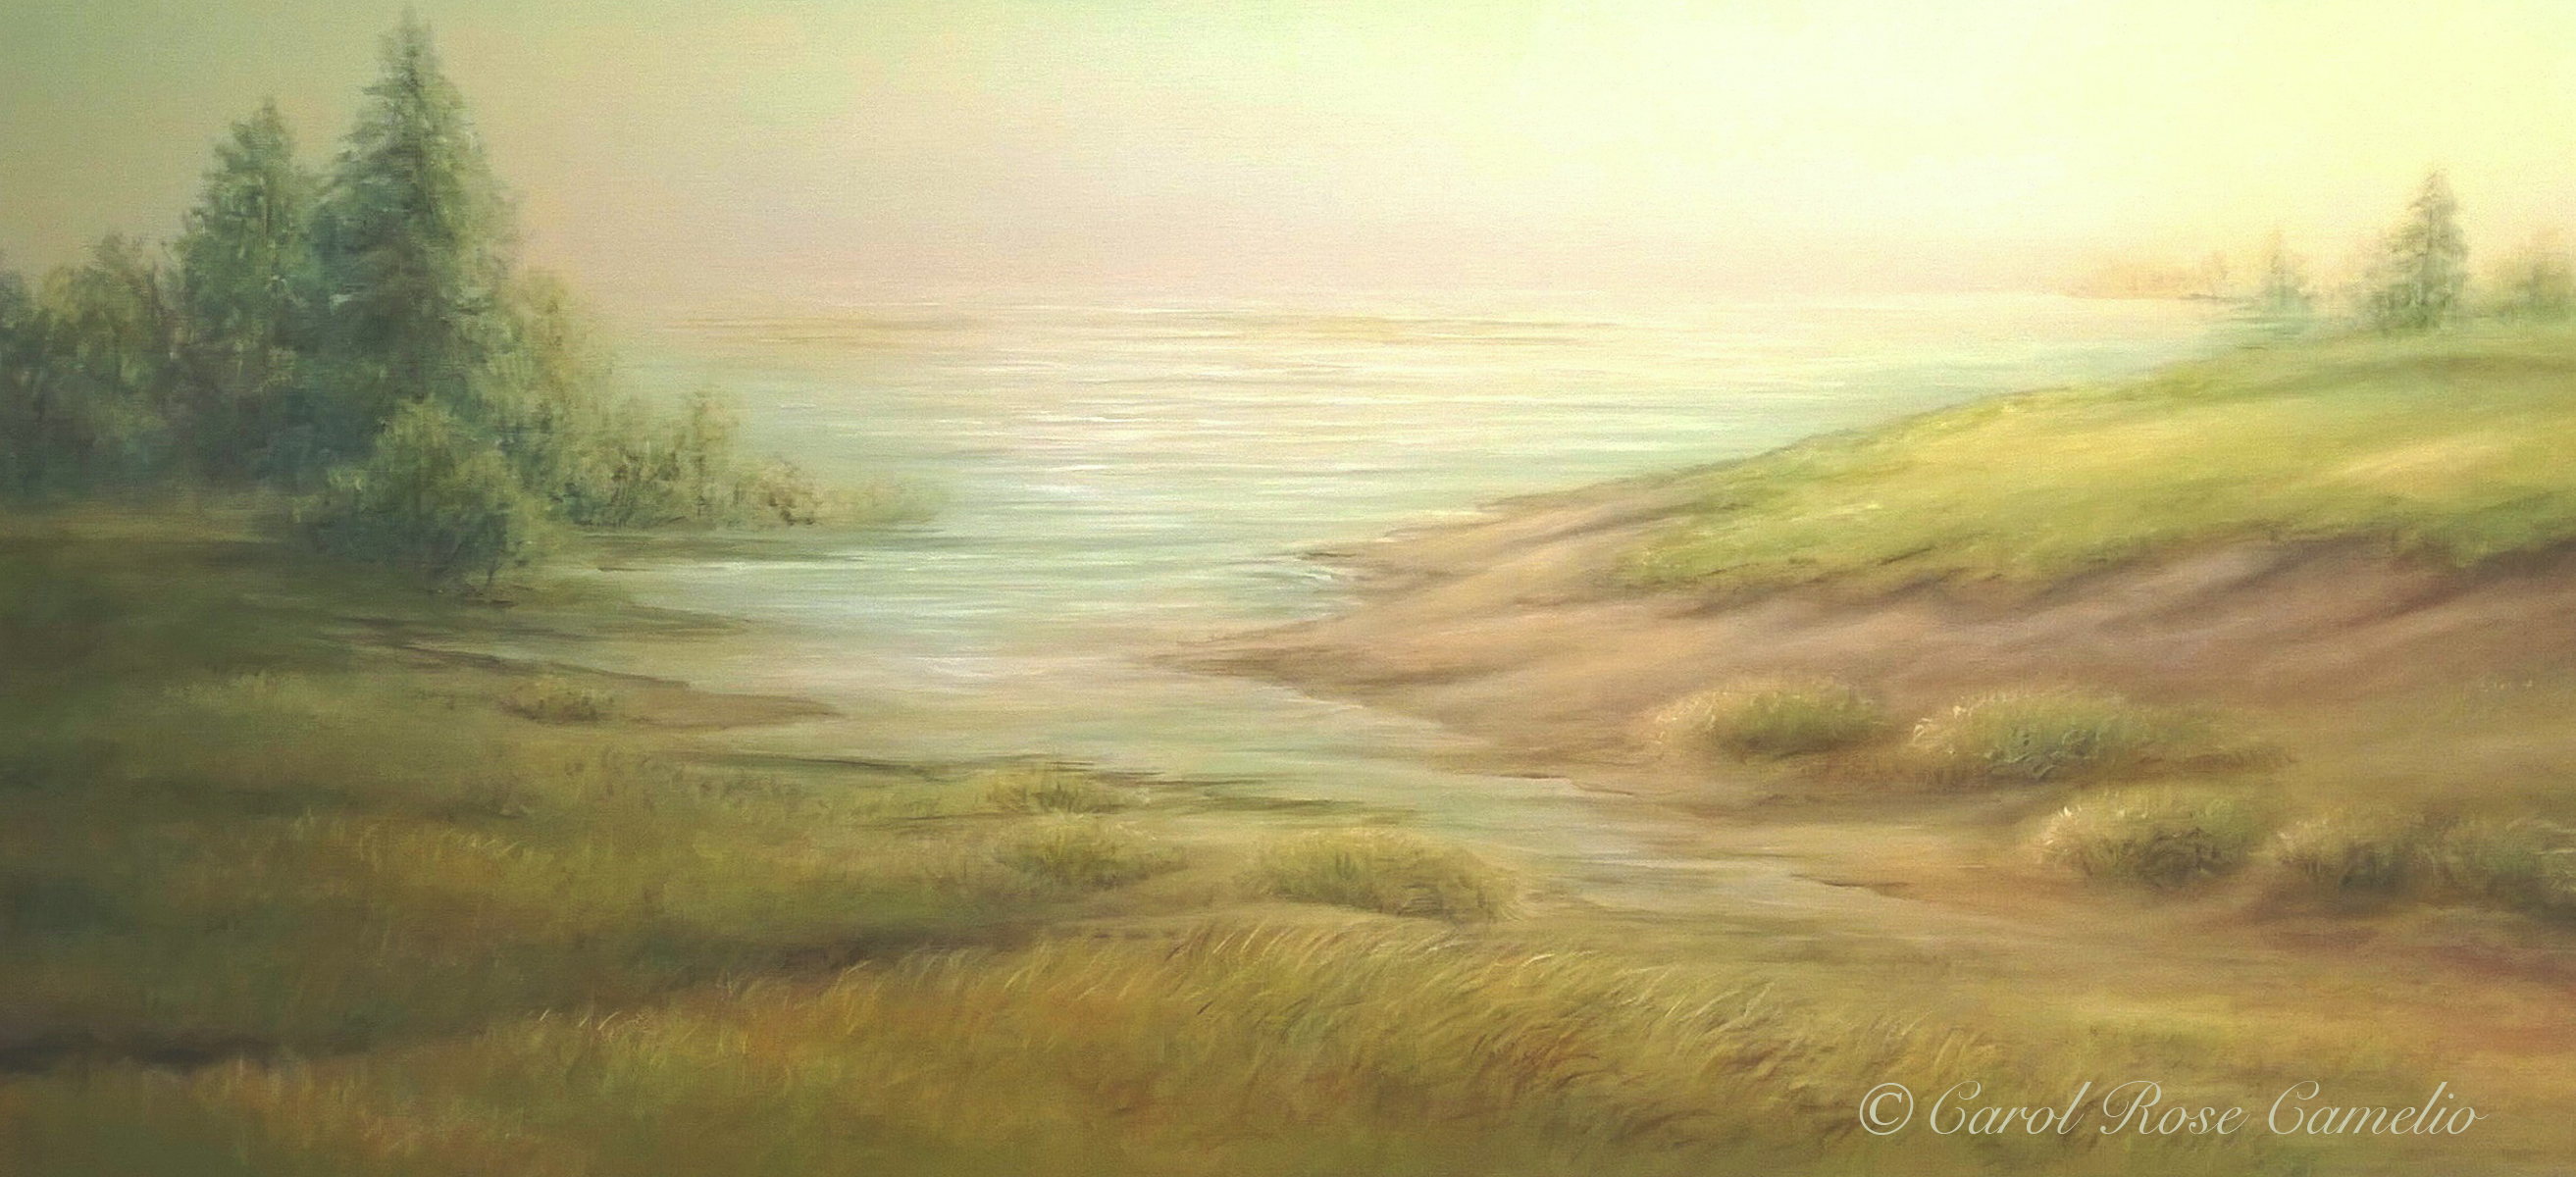 The Cove: On a foggy pastoral coast, water seeps between two gentle hills.